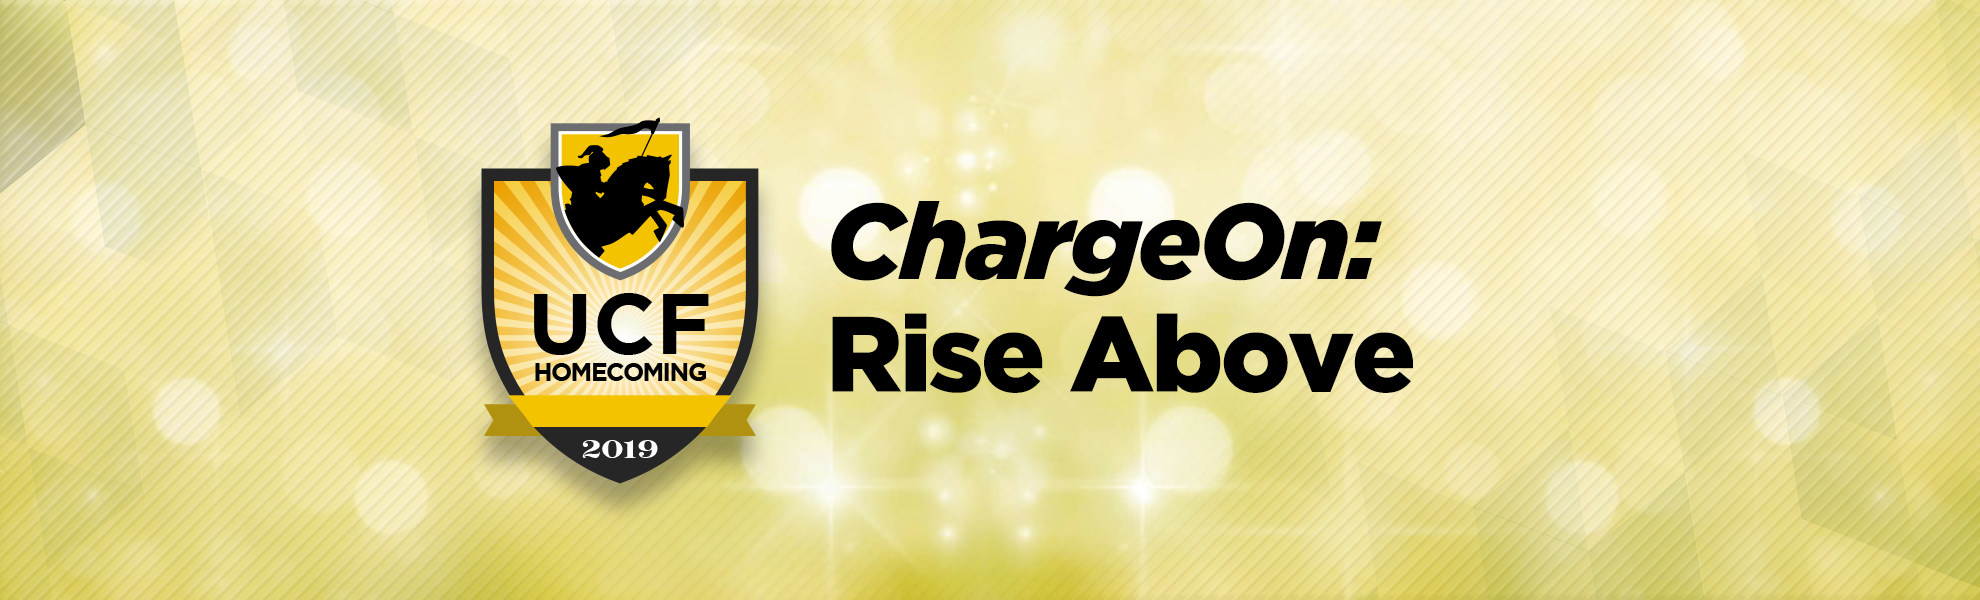 Featured Image for Meet The Charge On: Rise Above Panelists